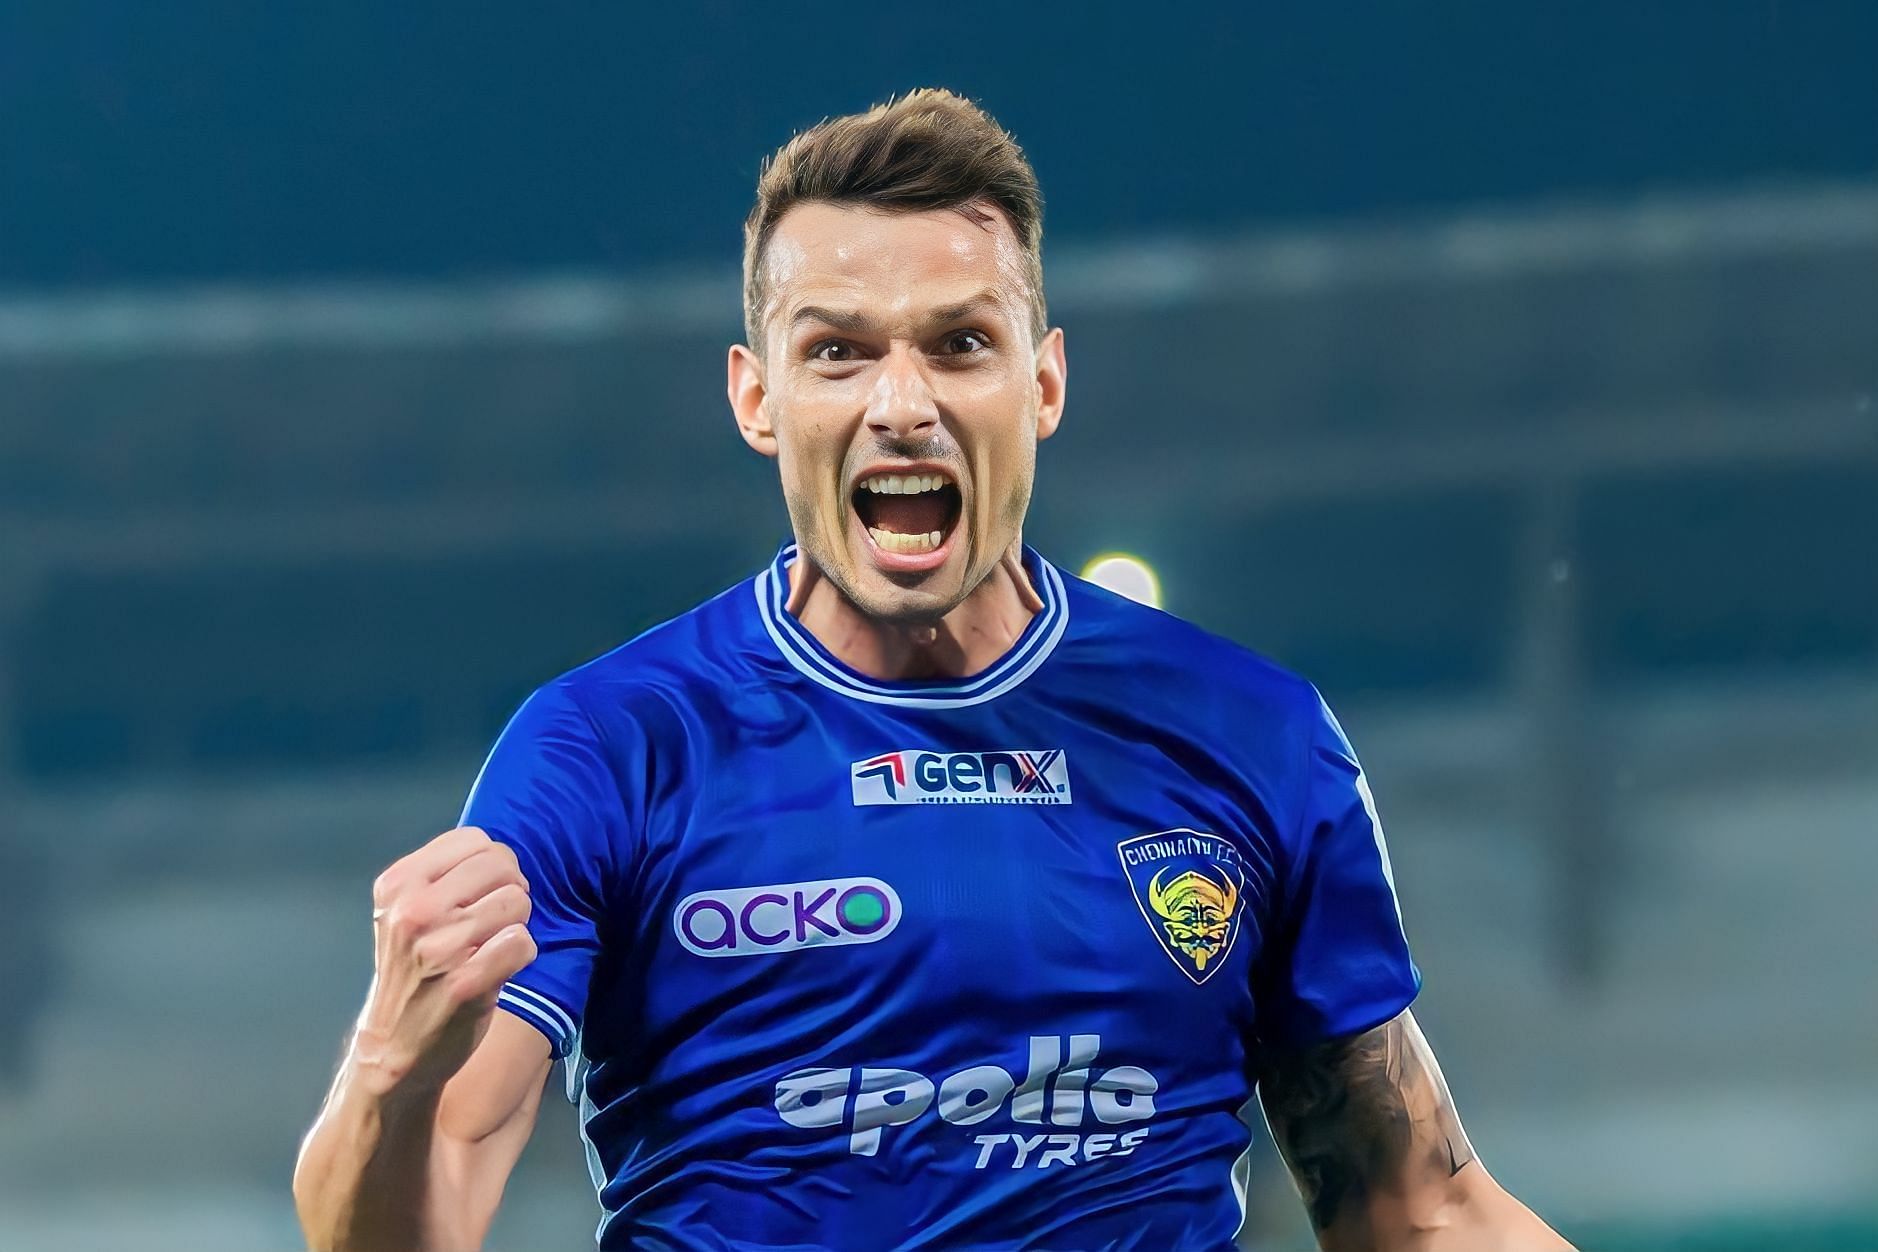 Petar Sliskovic who earlier this summer moved from Chennaiyin FC to Jamshedpur FC has been ruled out due to an injury (Image: CFC)